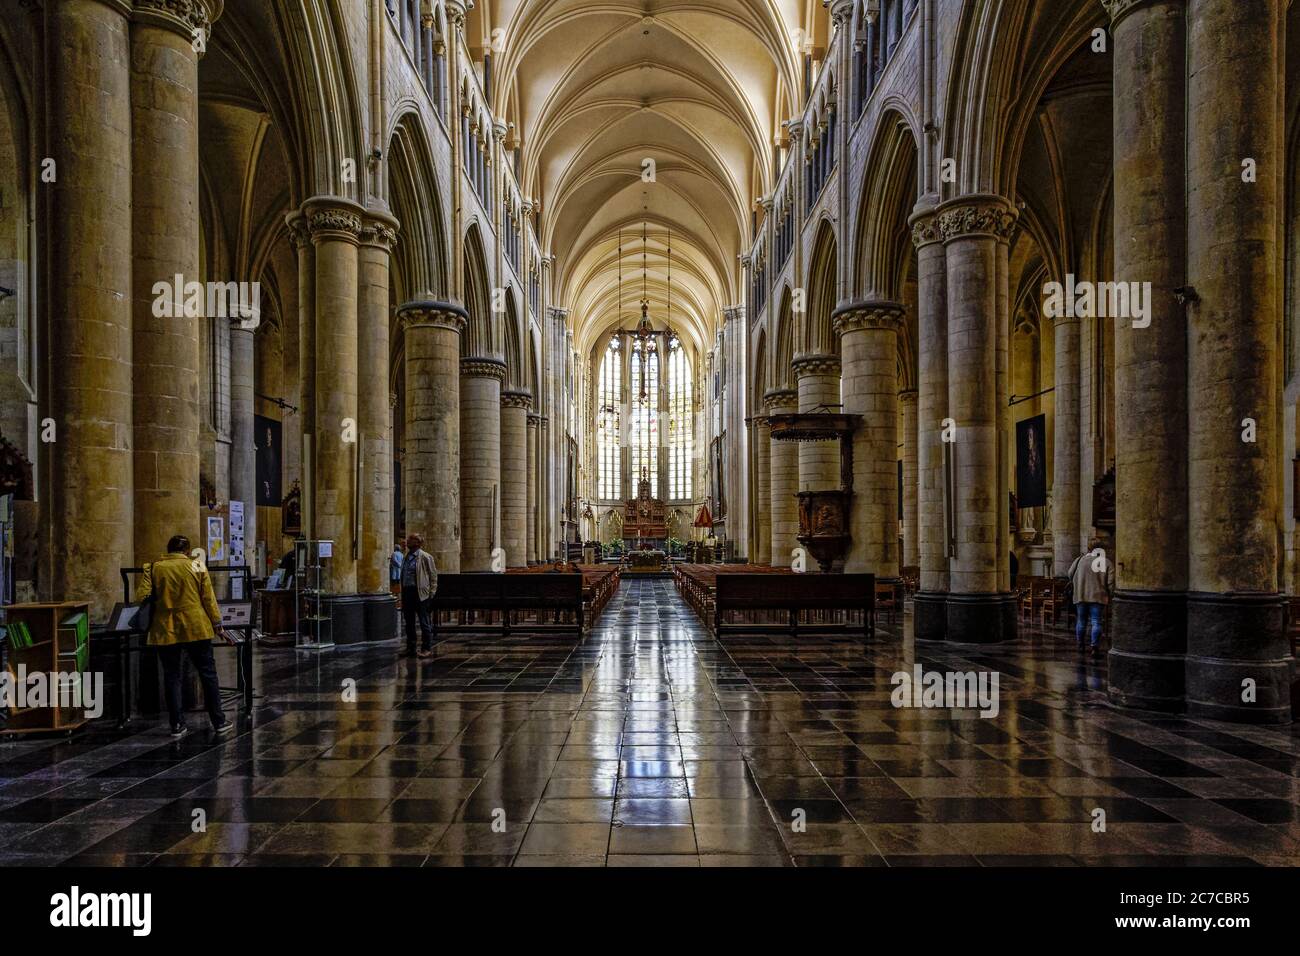 Beautiful inside shot of the Old Cathedral or Basilica of Our Lady in Tongeren, Belgium Stock Photo